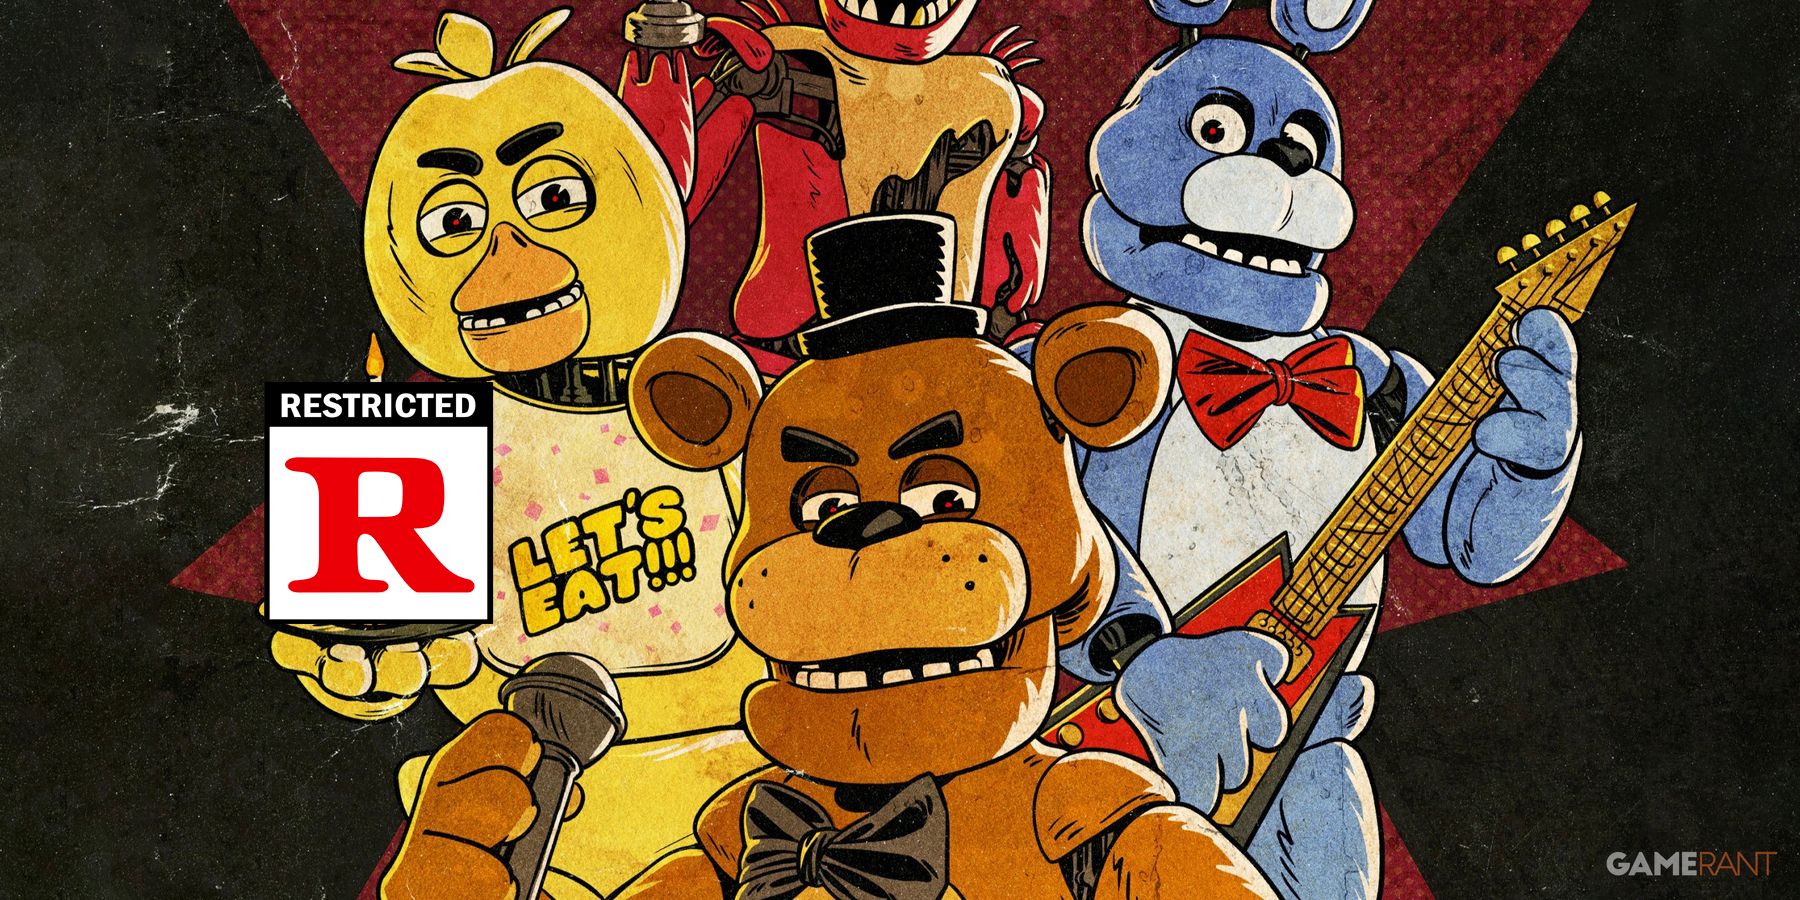 Screen Rant - Released 2 years before the Five Nights at